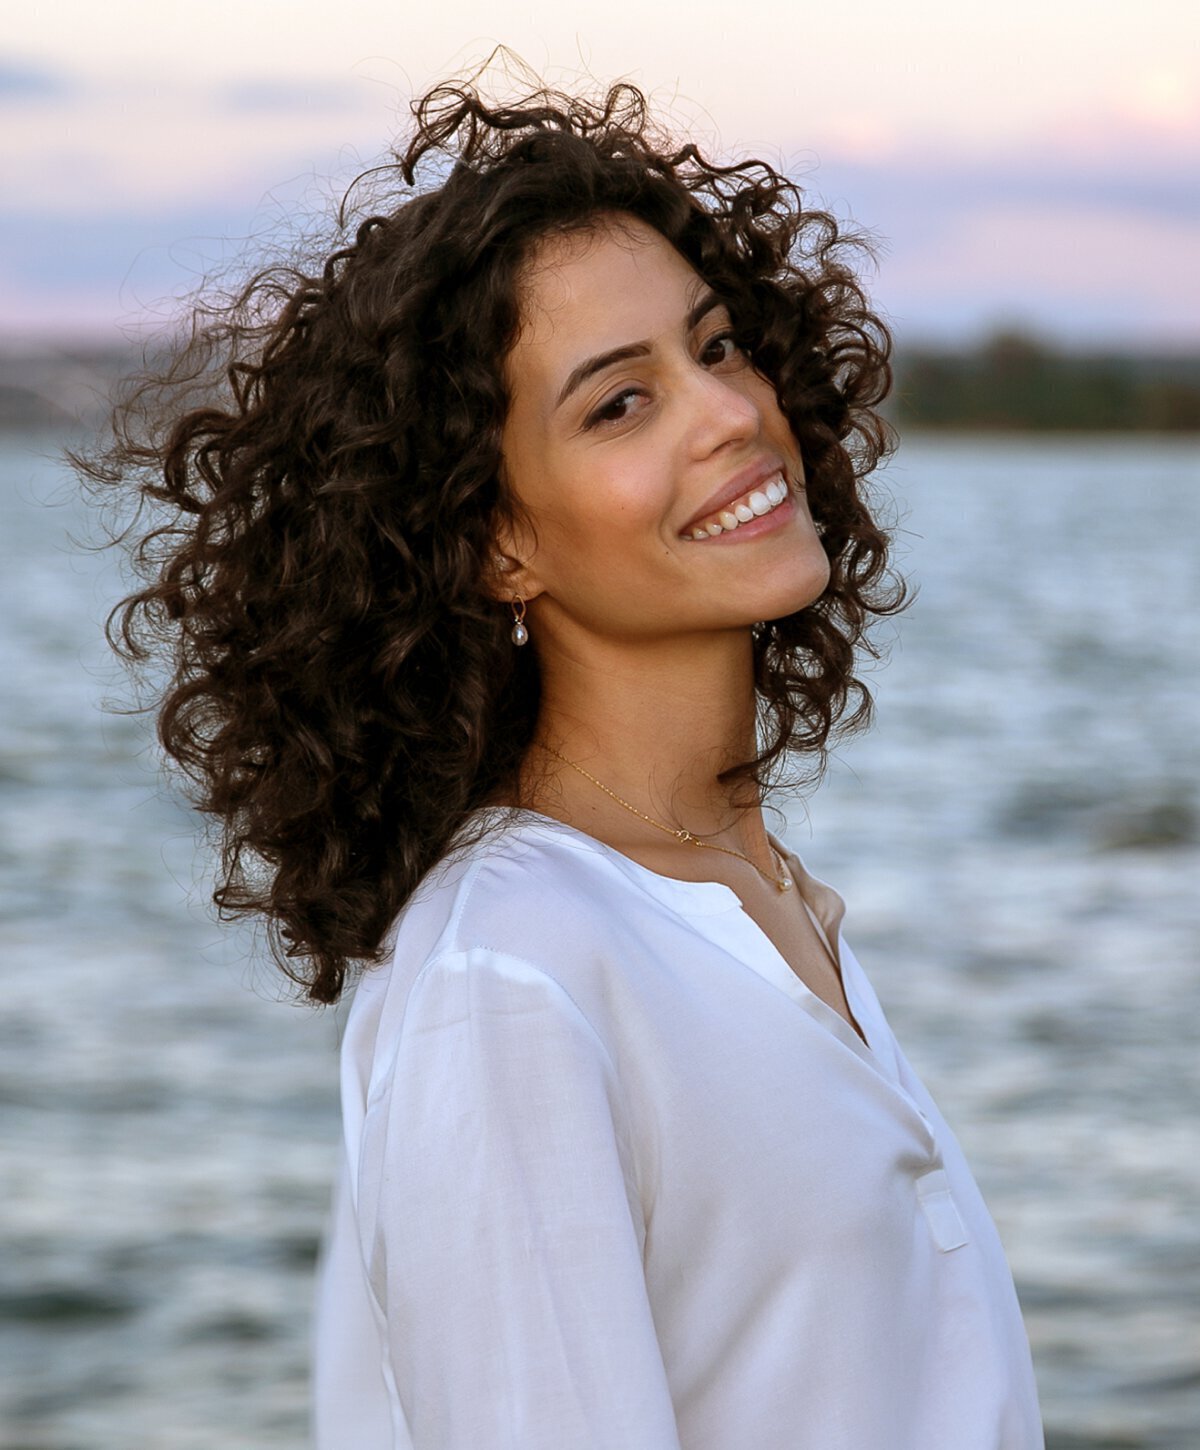 Woman with black curly hair smiling